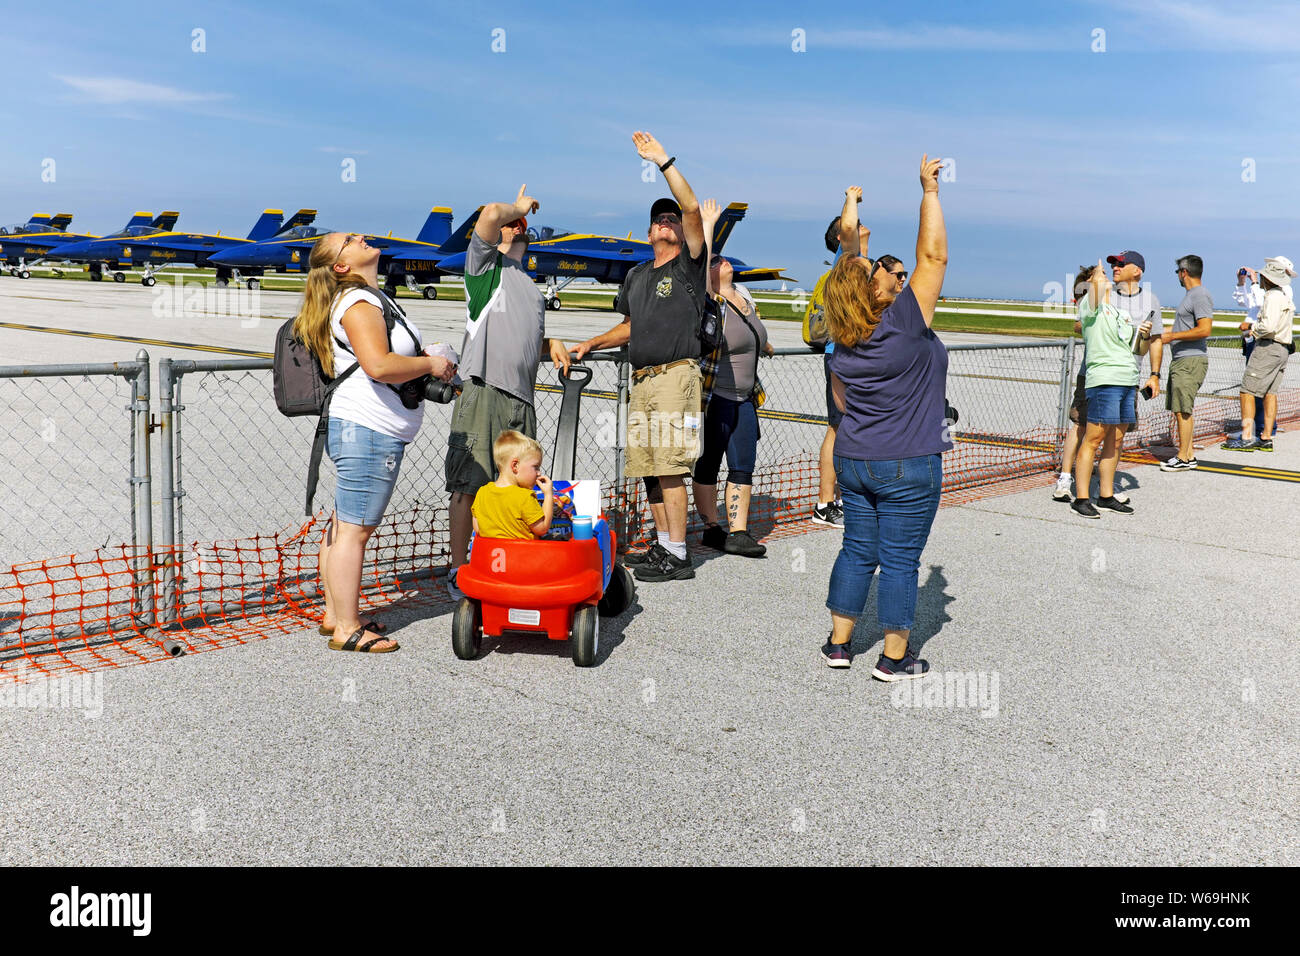 People attending the 2018 National Air Show in Cleveland, Ohio over the Labor Day weekend look to the skies to watch the air portion of the show. Stock Photo